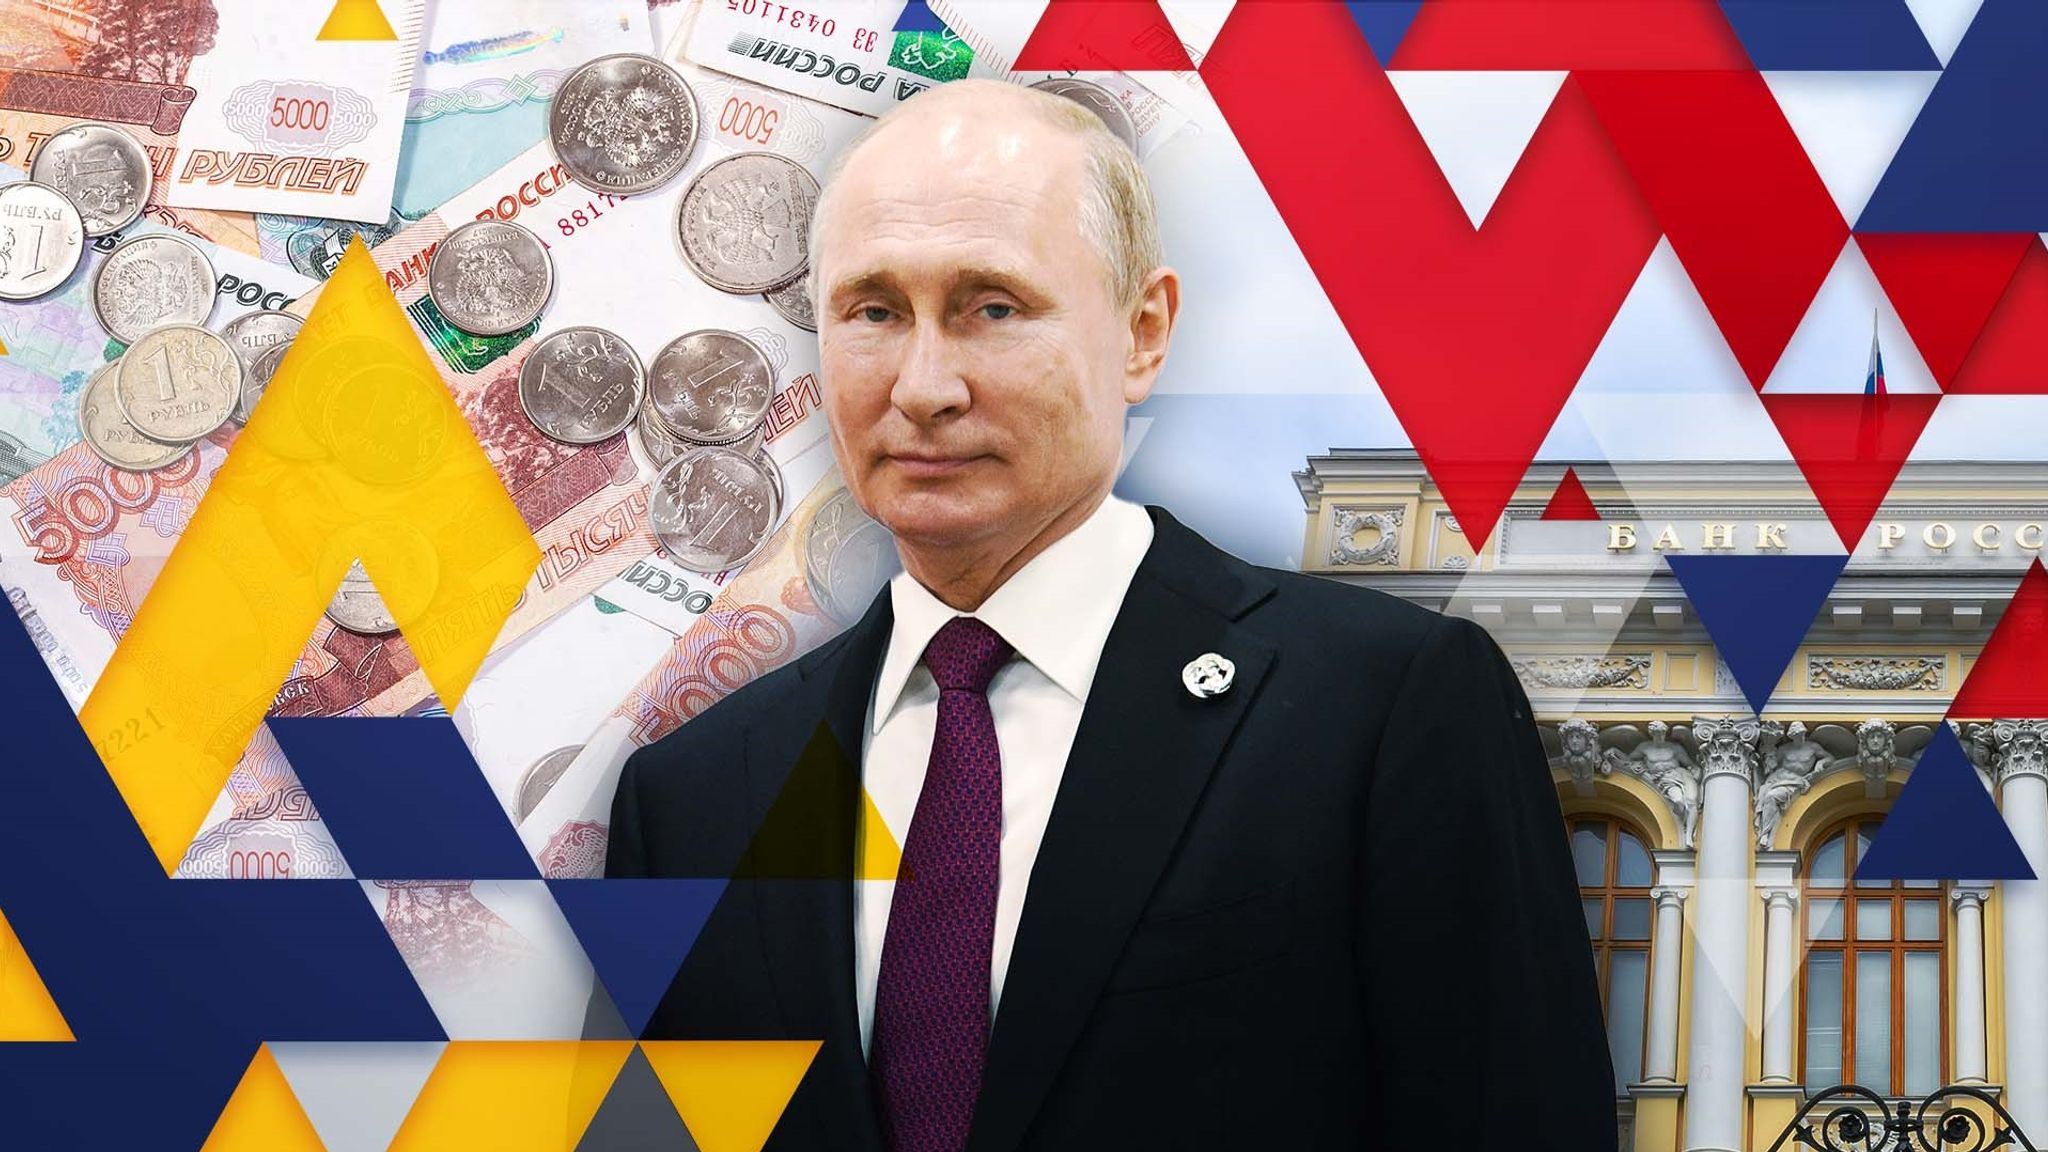 Russia Is Now the World's Most-Sanctioned Nation, Surging Past